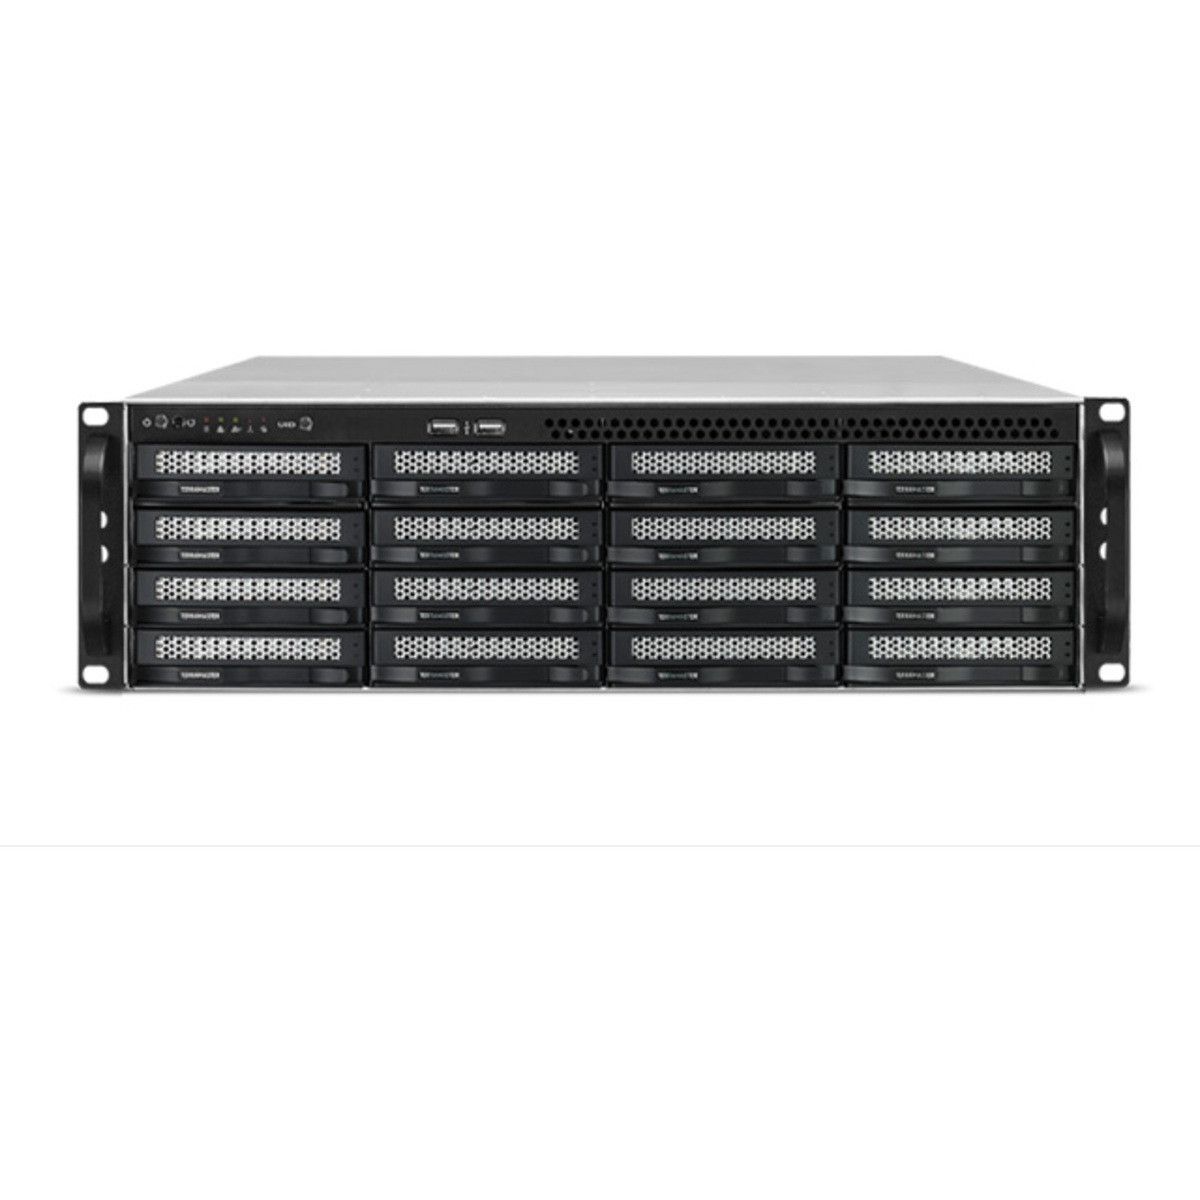 TerraMaster U16-722-2224 84tb 16-Bay RackMount Large Business / Enterprise NAS - Network Attached Storage Device 14x6tb Seagate BarraCuda ST6000DM003 3.5 5400rpm SATA 6Gb/s HDD CONSUMER Class Drives Installed - Burn-In Tested U16-722-2224